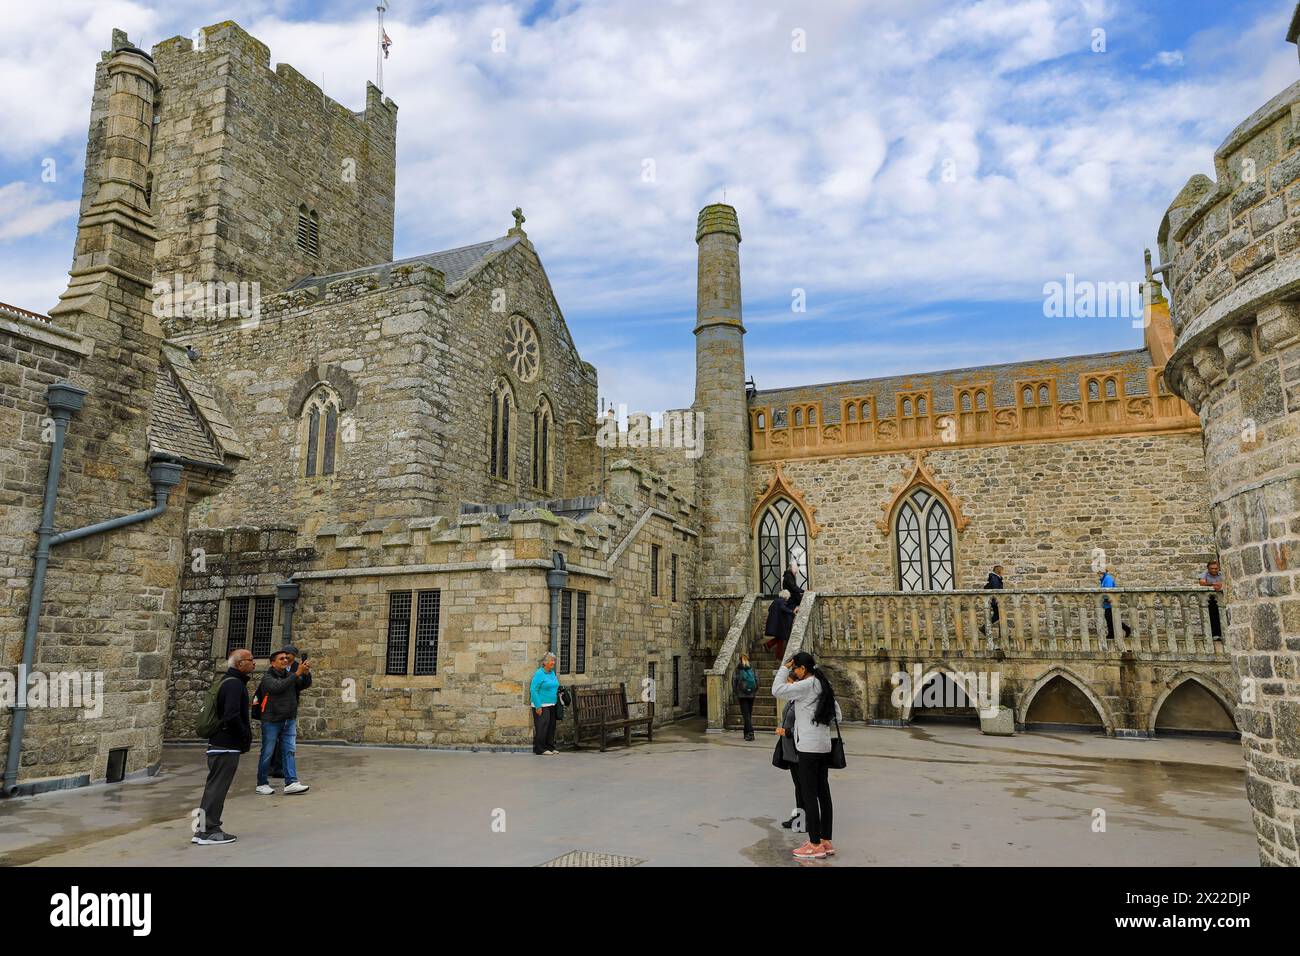 The courtyard at St Michael's Mount castle, on a tidal island in Mount's Bay, Marazion, Penzance, Cornwall, England, United Kingdom Stock Photo